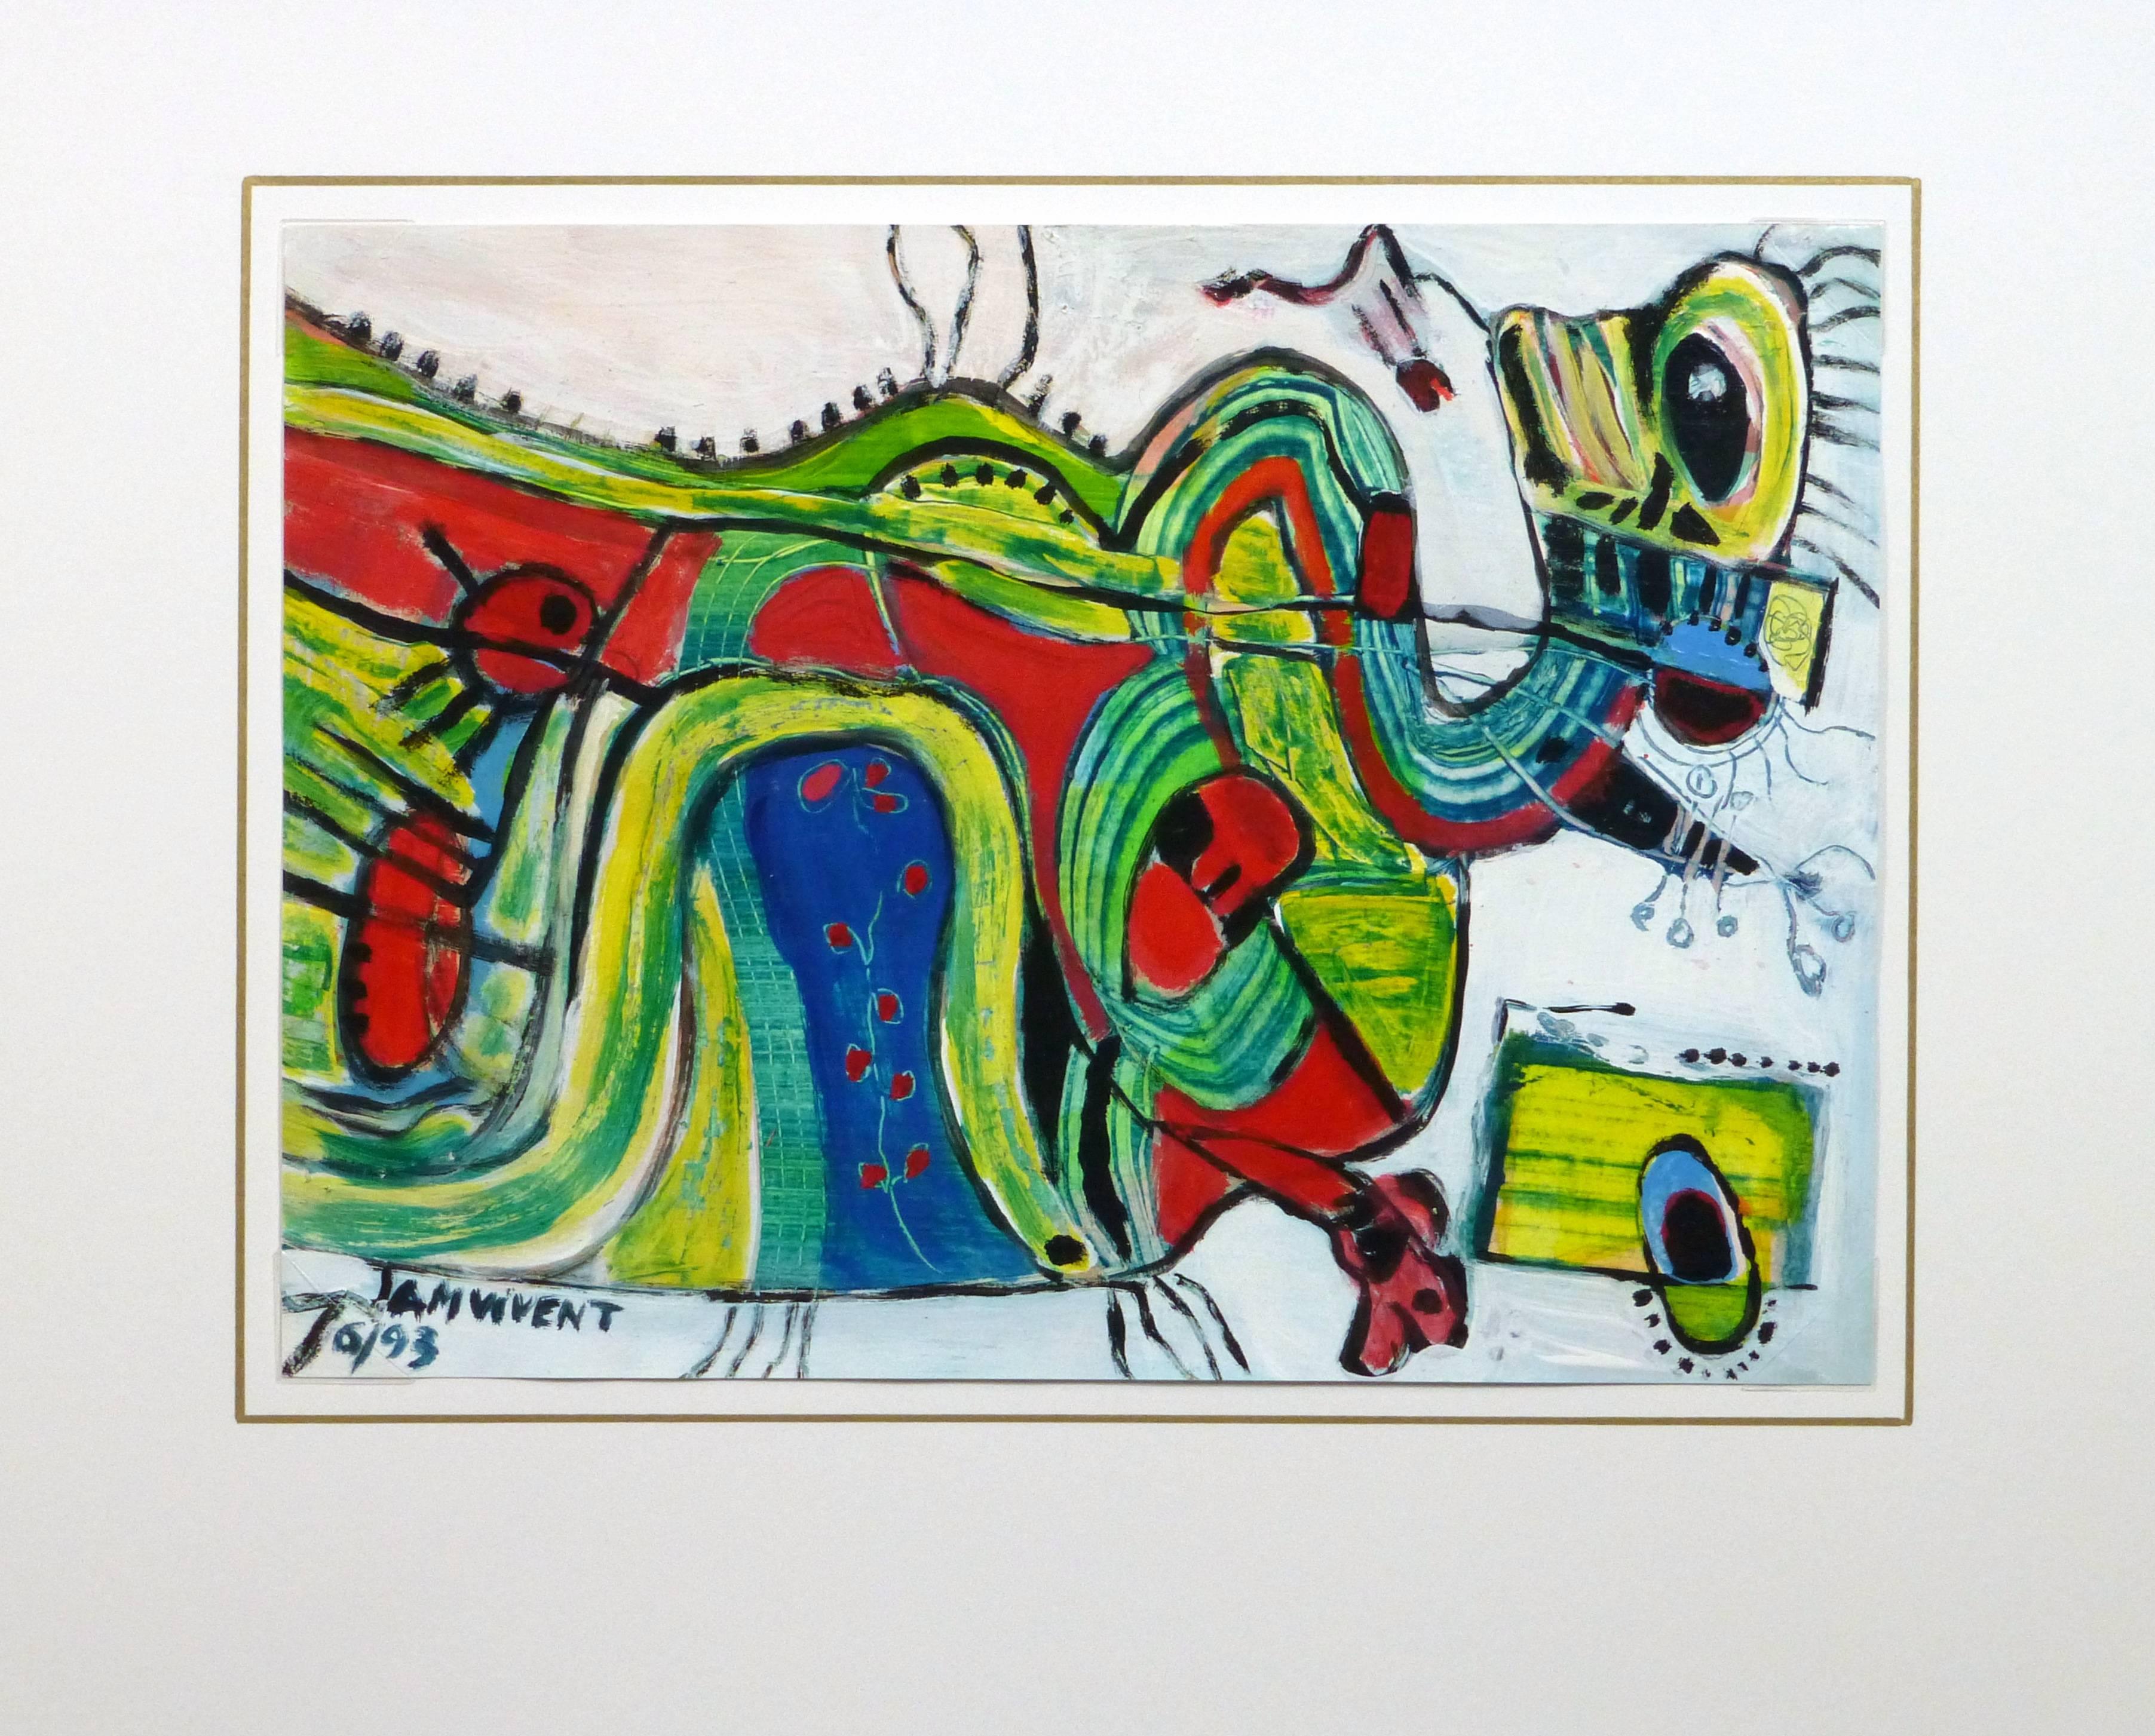 Vibrant acrylic abstract of a fantastical creature in bold hues of red, green and blue by A. Vivent, 1993. Signed and dated lower left. 

Original artwork on paper displayed on a white mat with a gold border. Archival plastic sleeve and Certificate